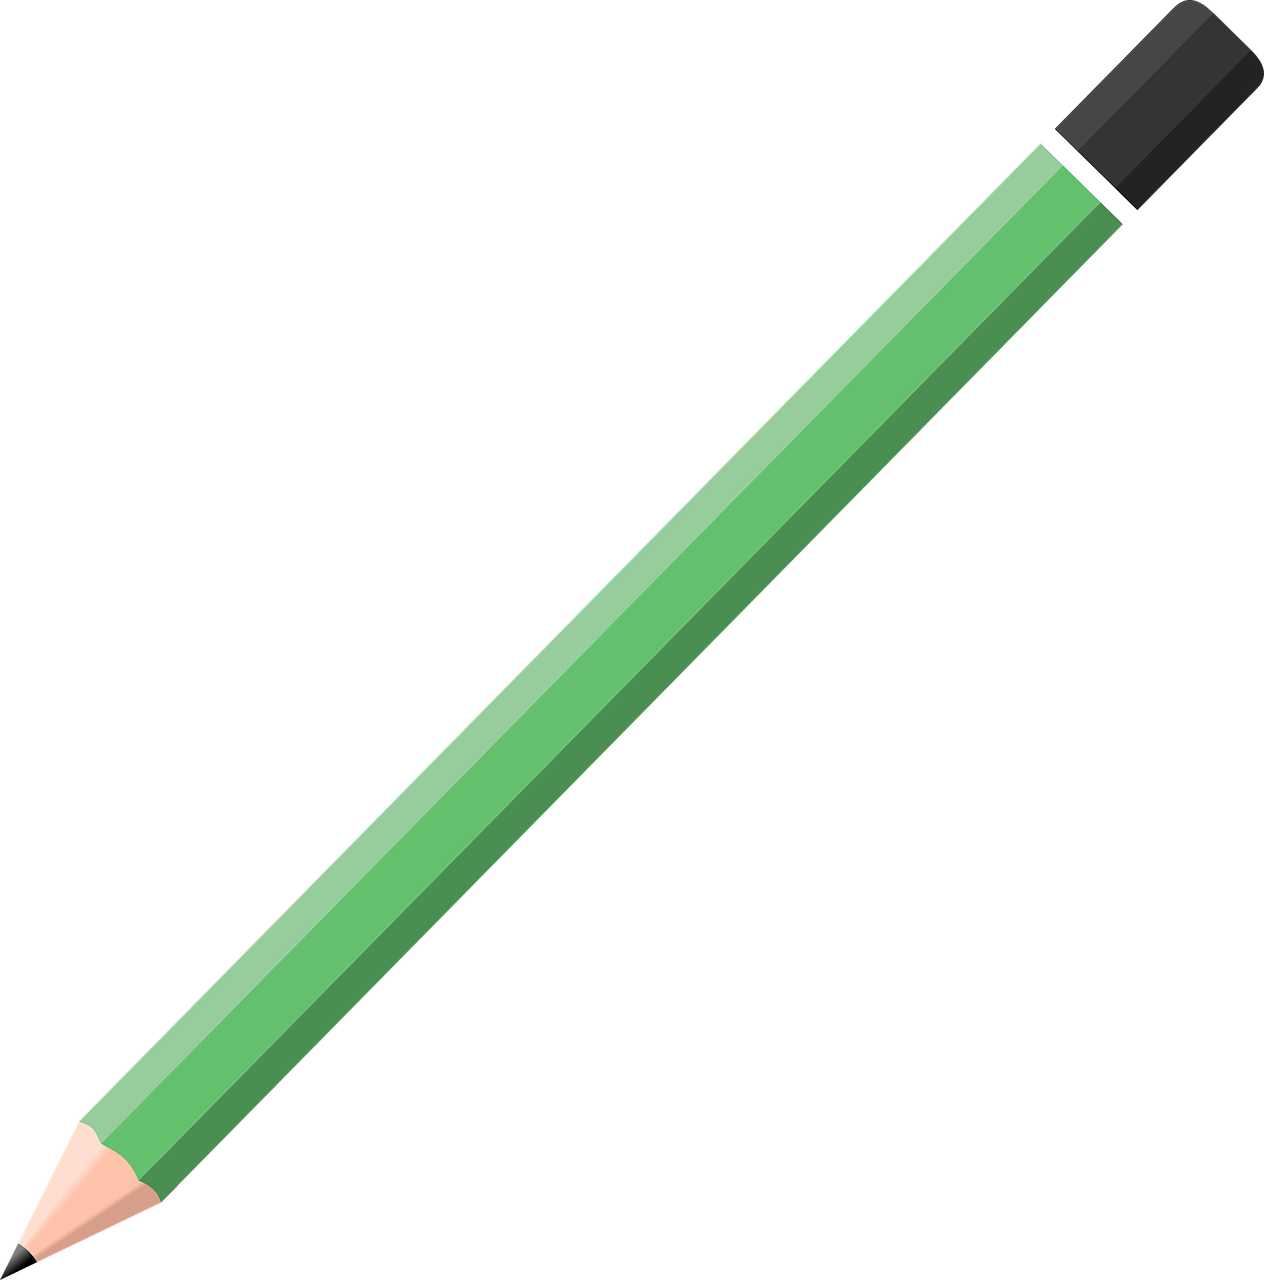 a green pencil on a black background, a digital rendering, very flat shading, clipart, green and black colors, medium: black pencil